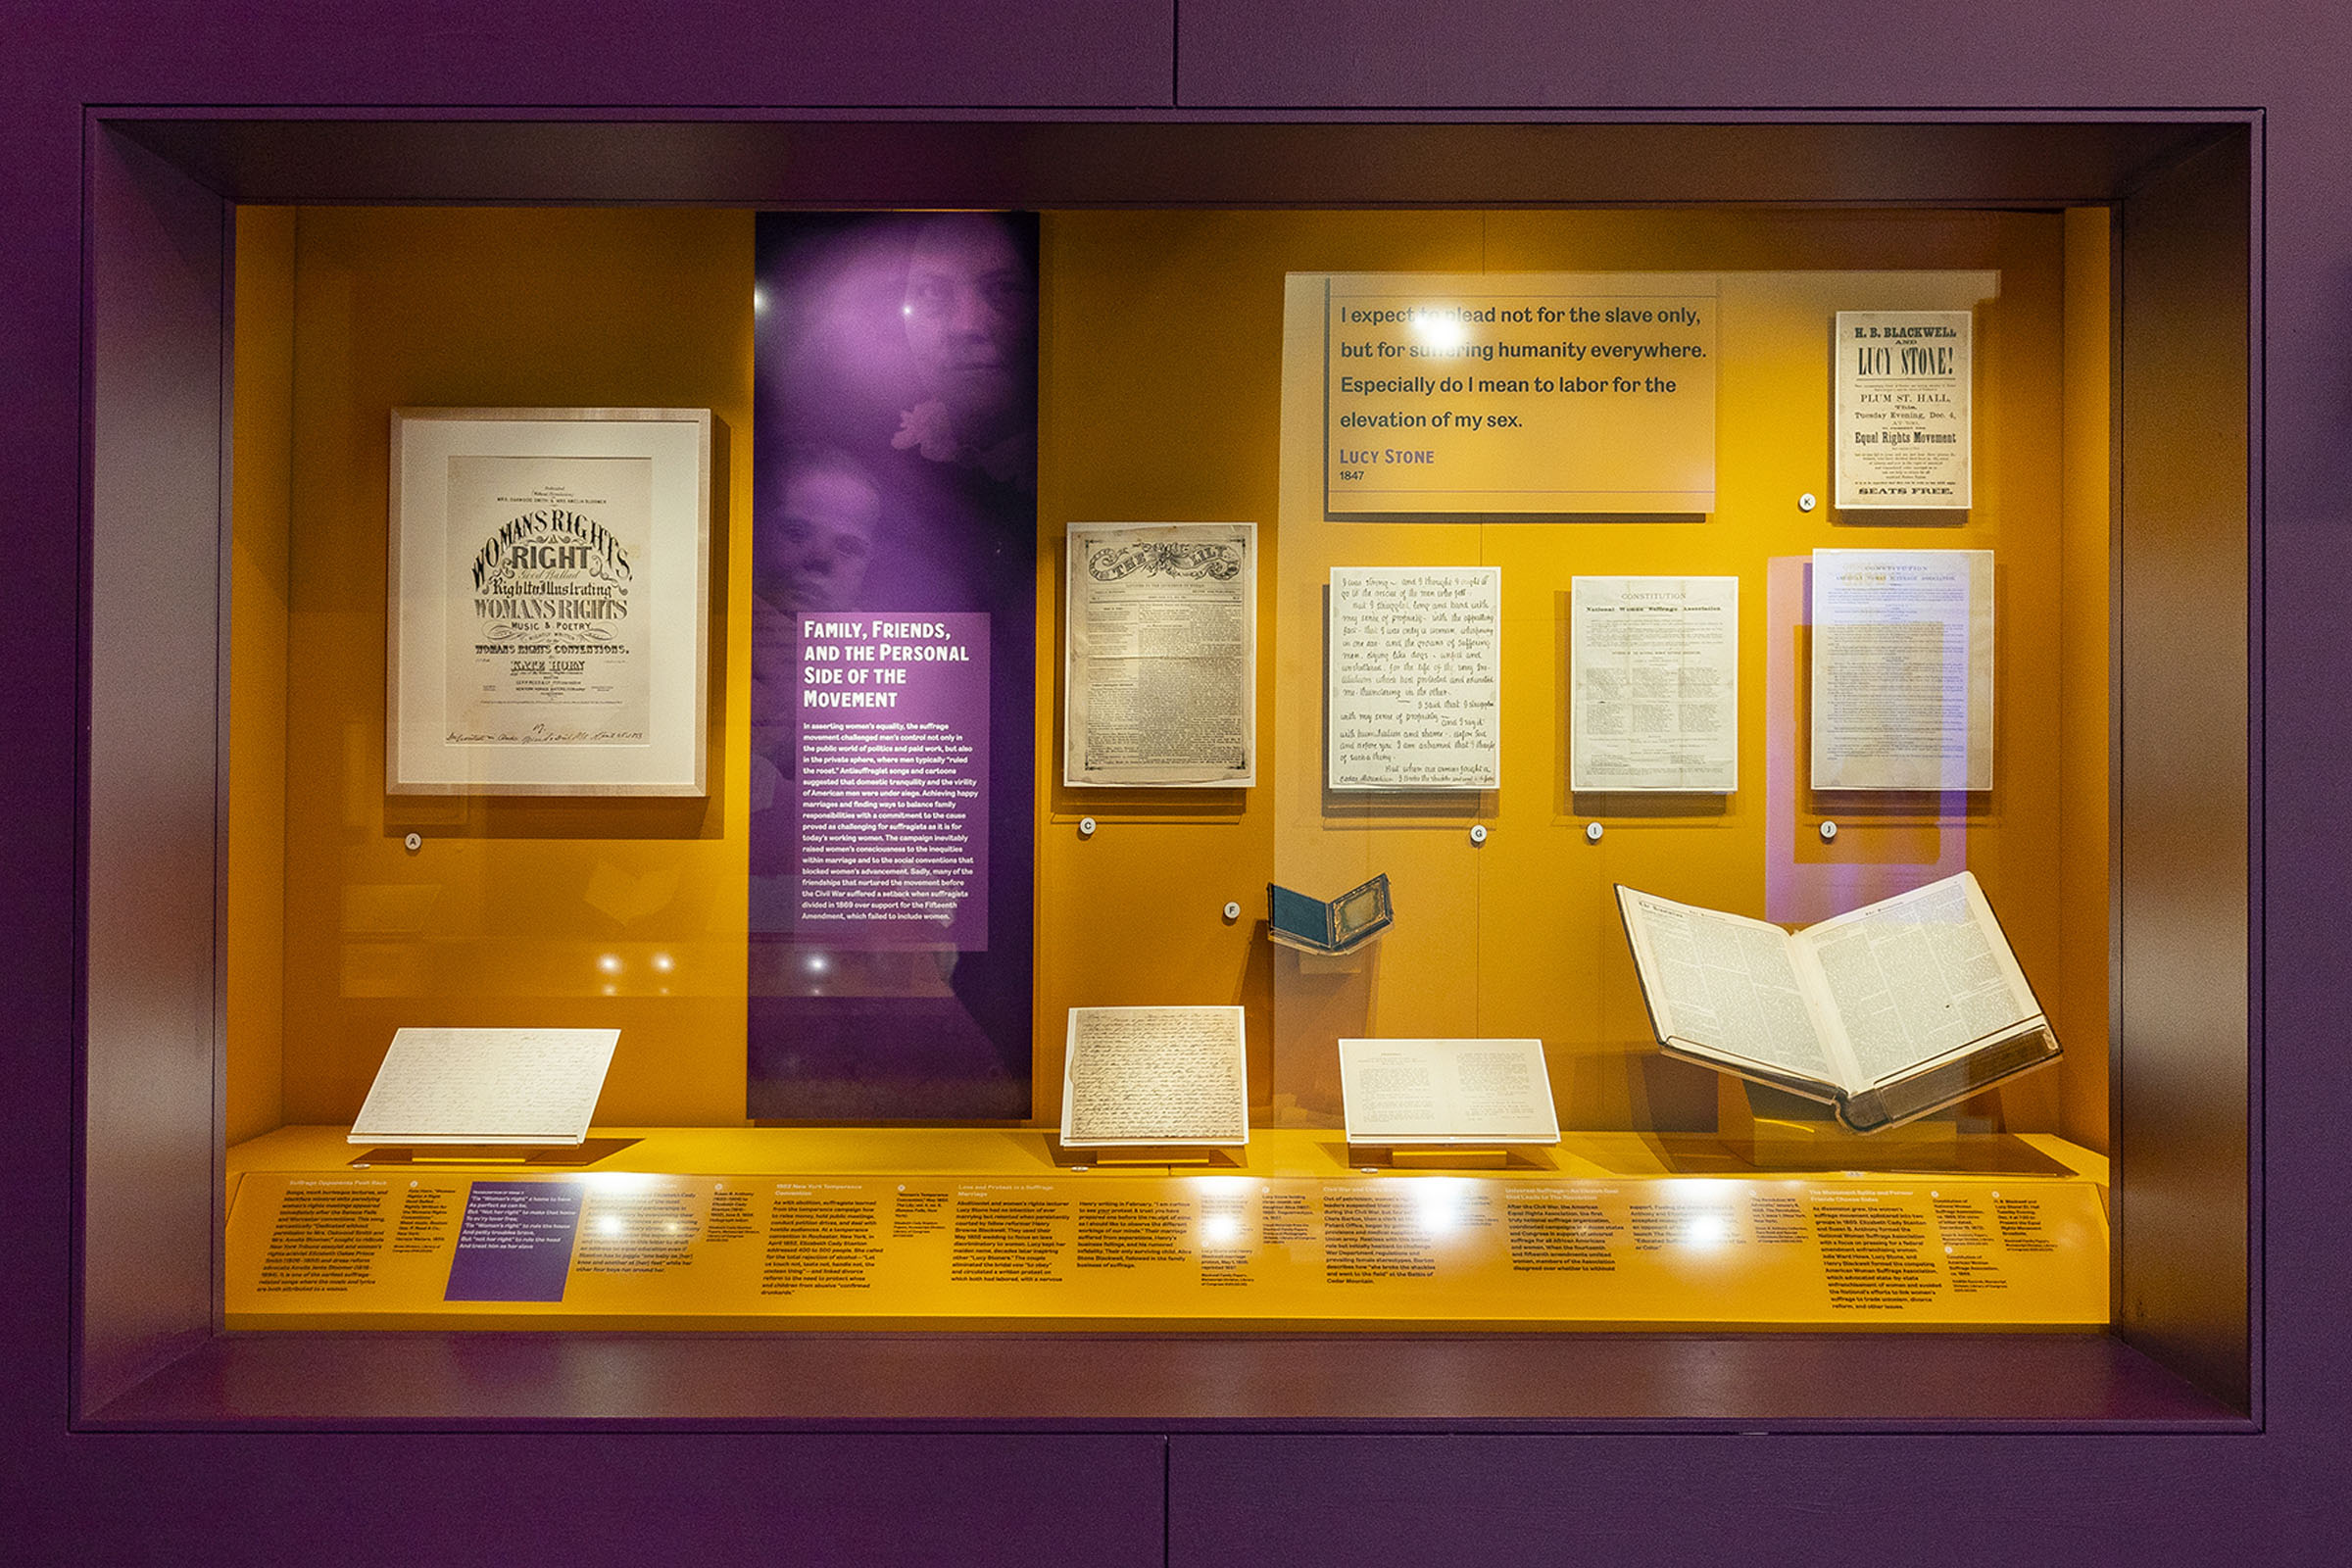 Shall Not Be Denied Exhibition. In addition, P+A incorporated imagery into the case displays, lending greater visual context to the documents on view.